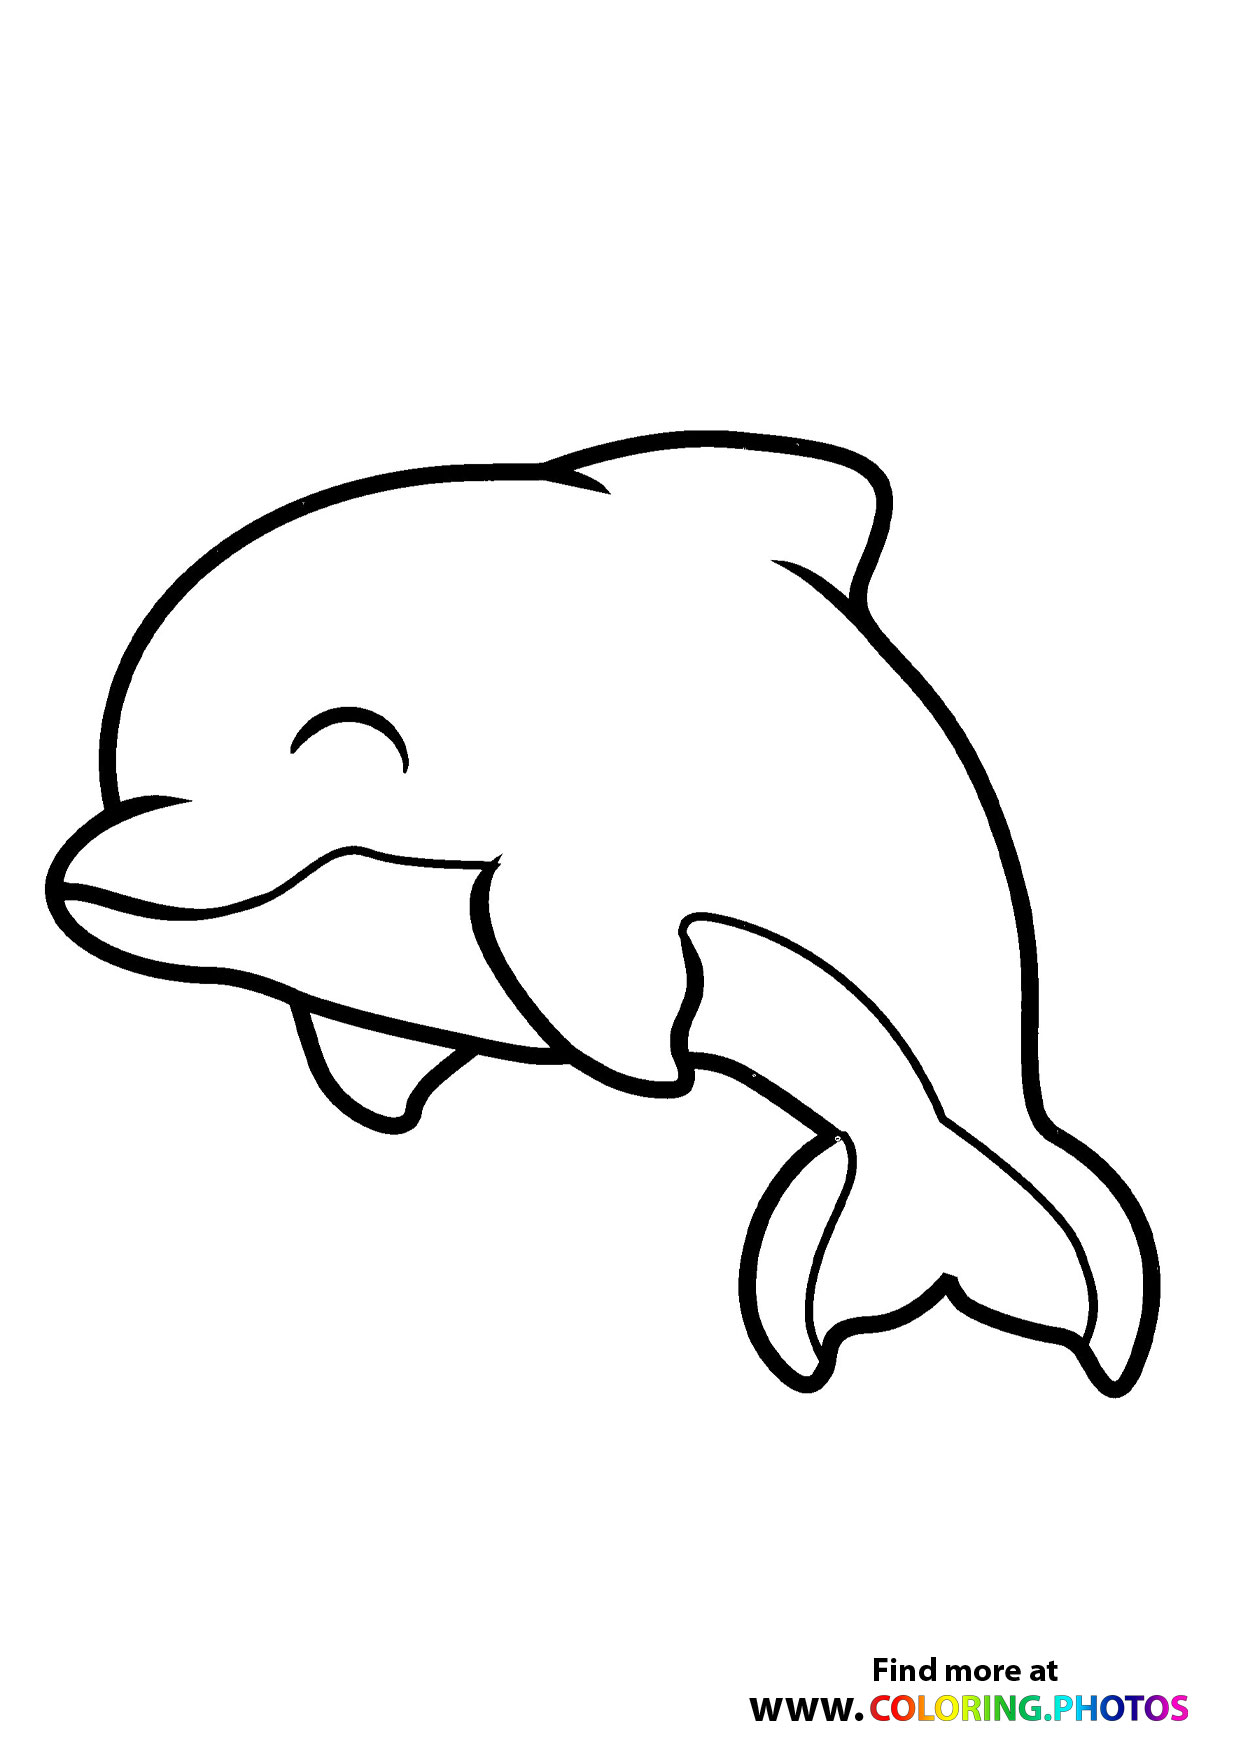 Dolphin jumping in the air - Coloring Pages for kids